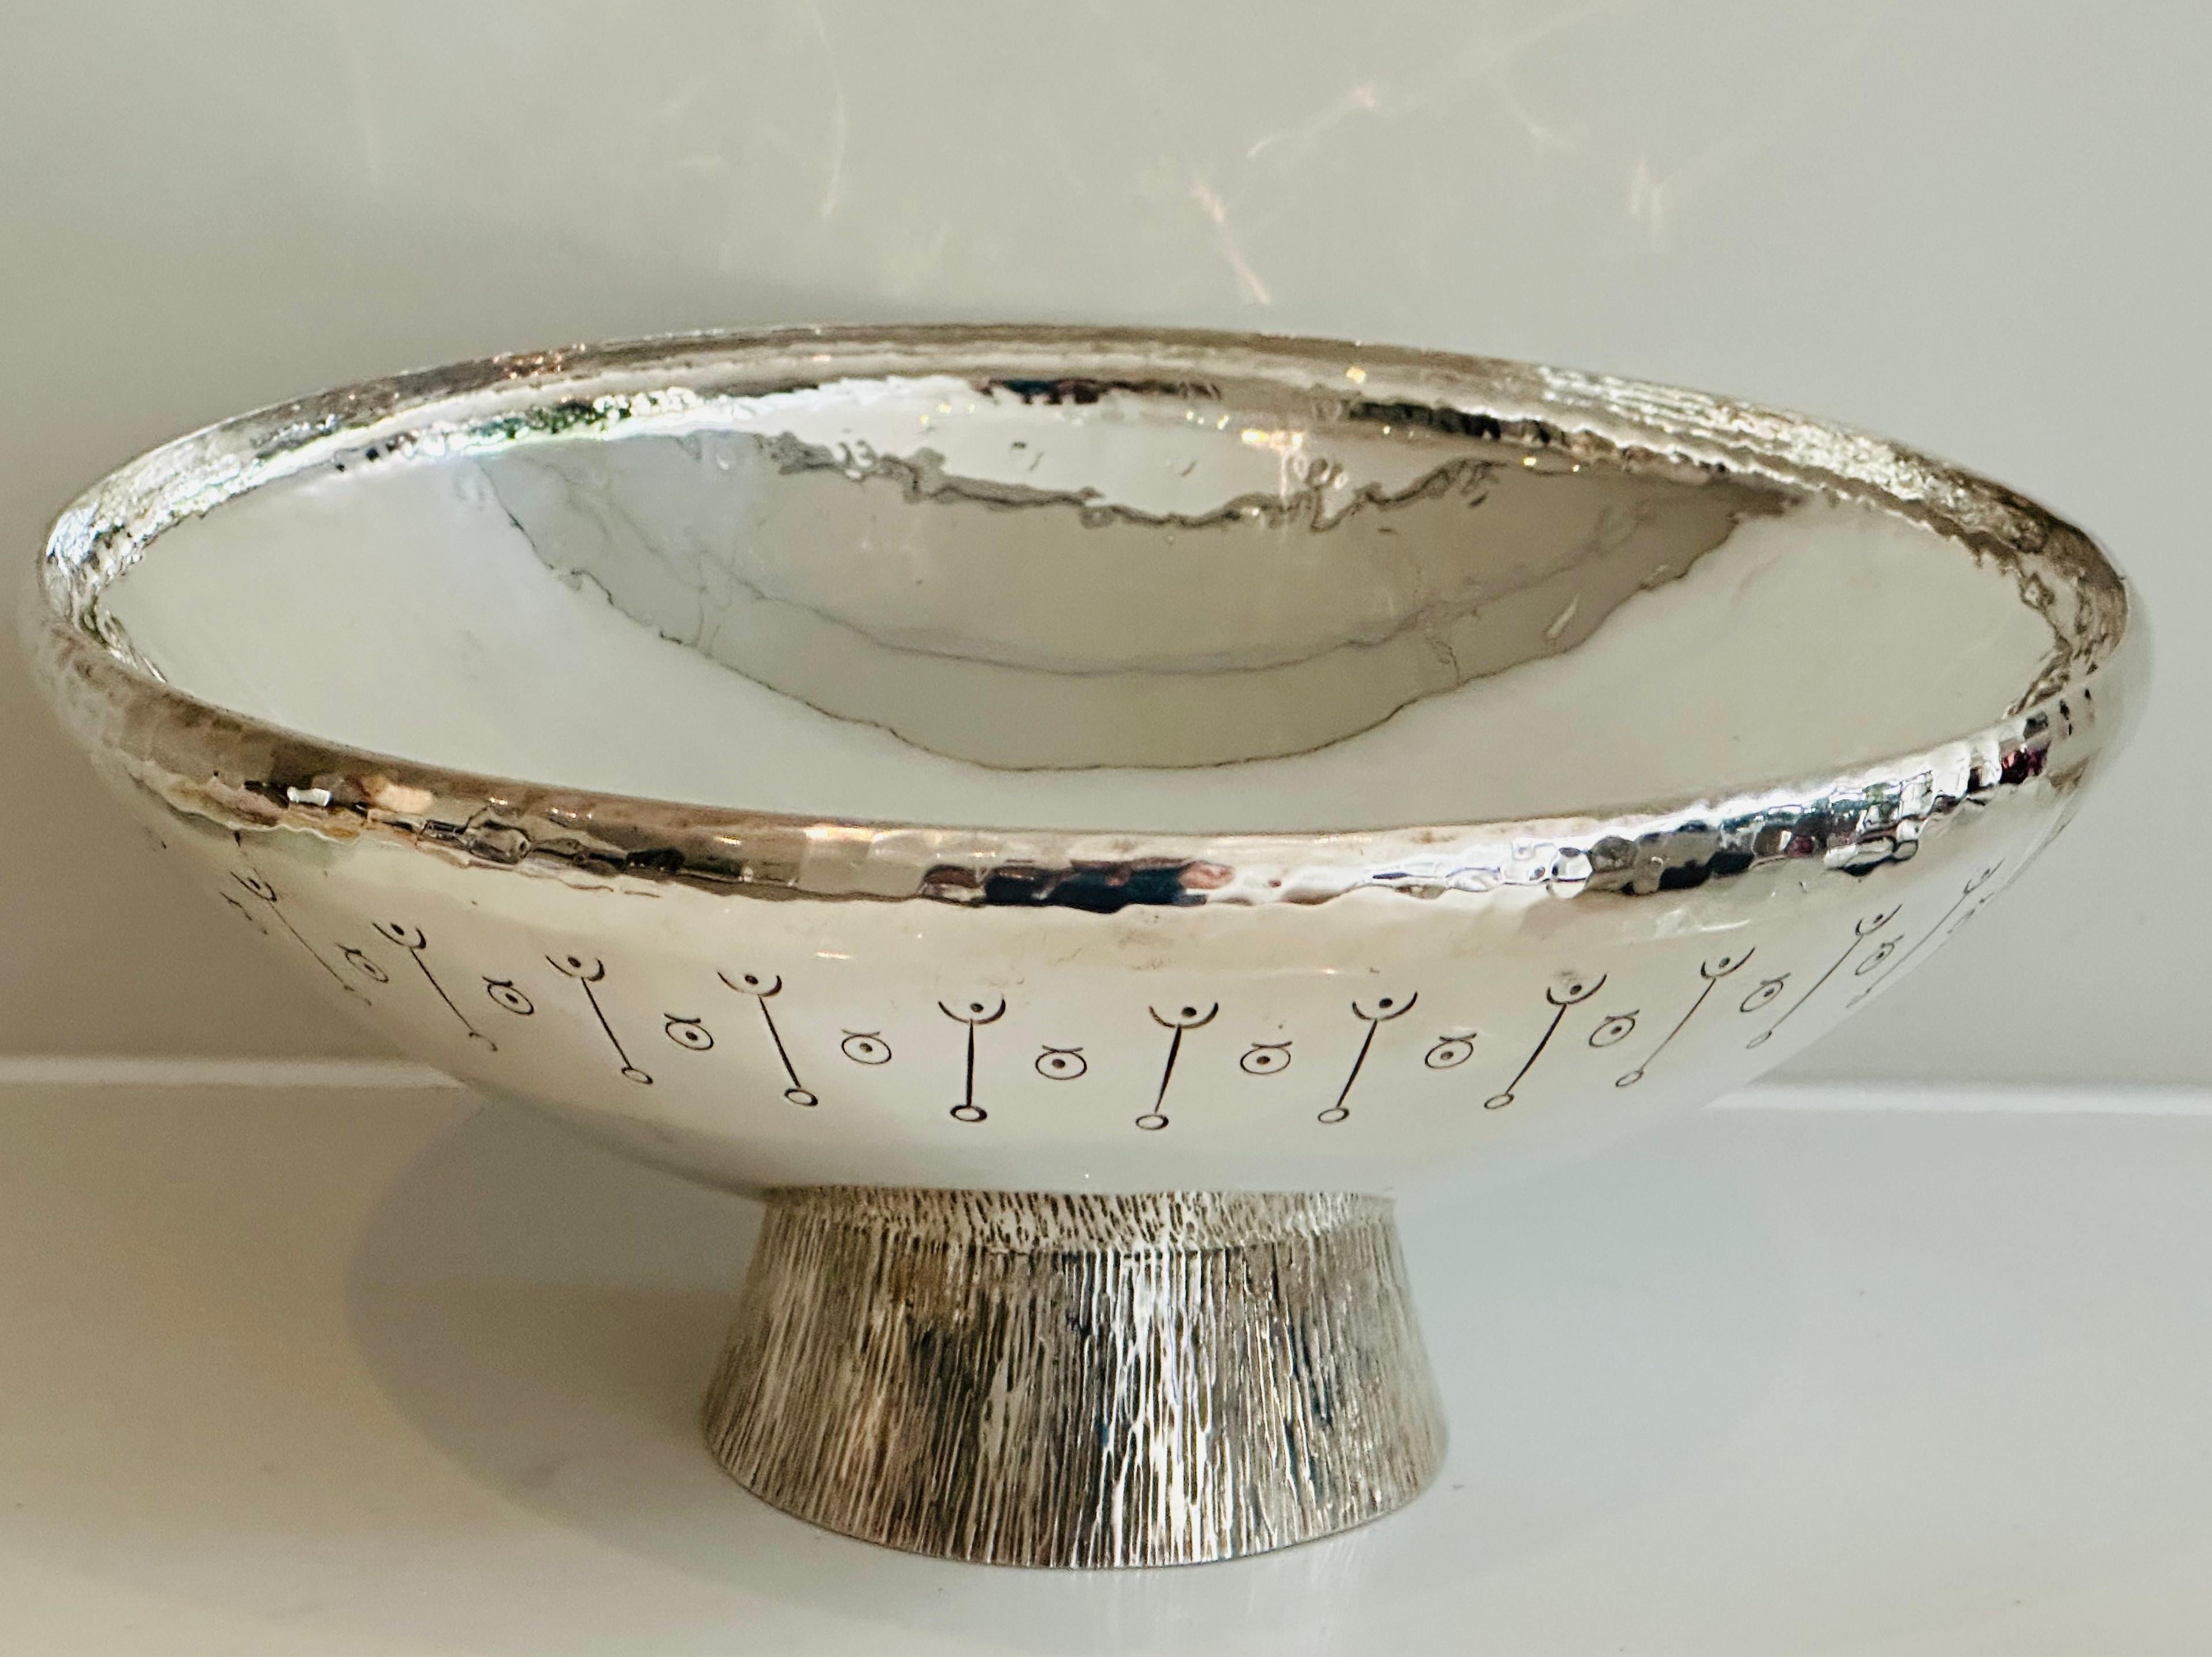 1980s English Silver Plated Decorative Hand-Hammered Serving or Display Bowl For Sale 2